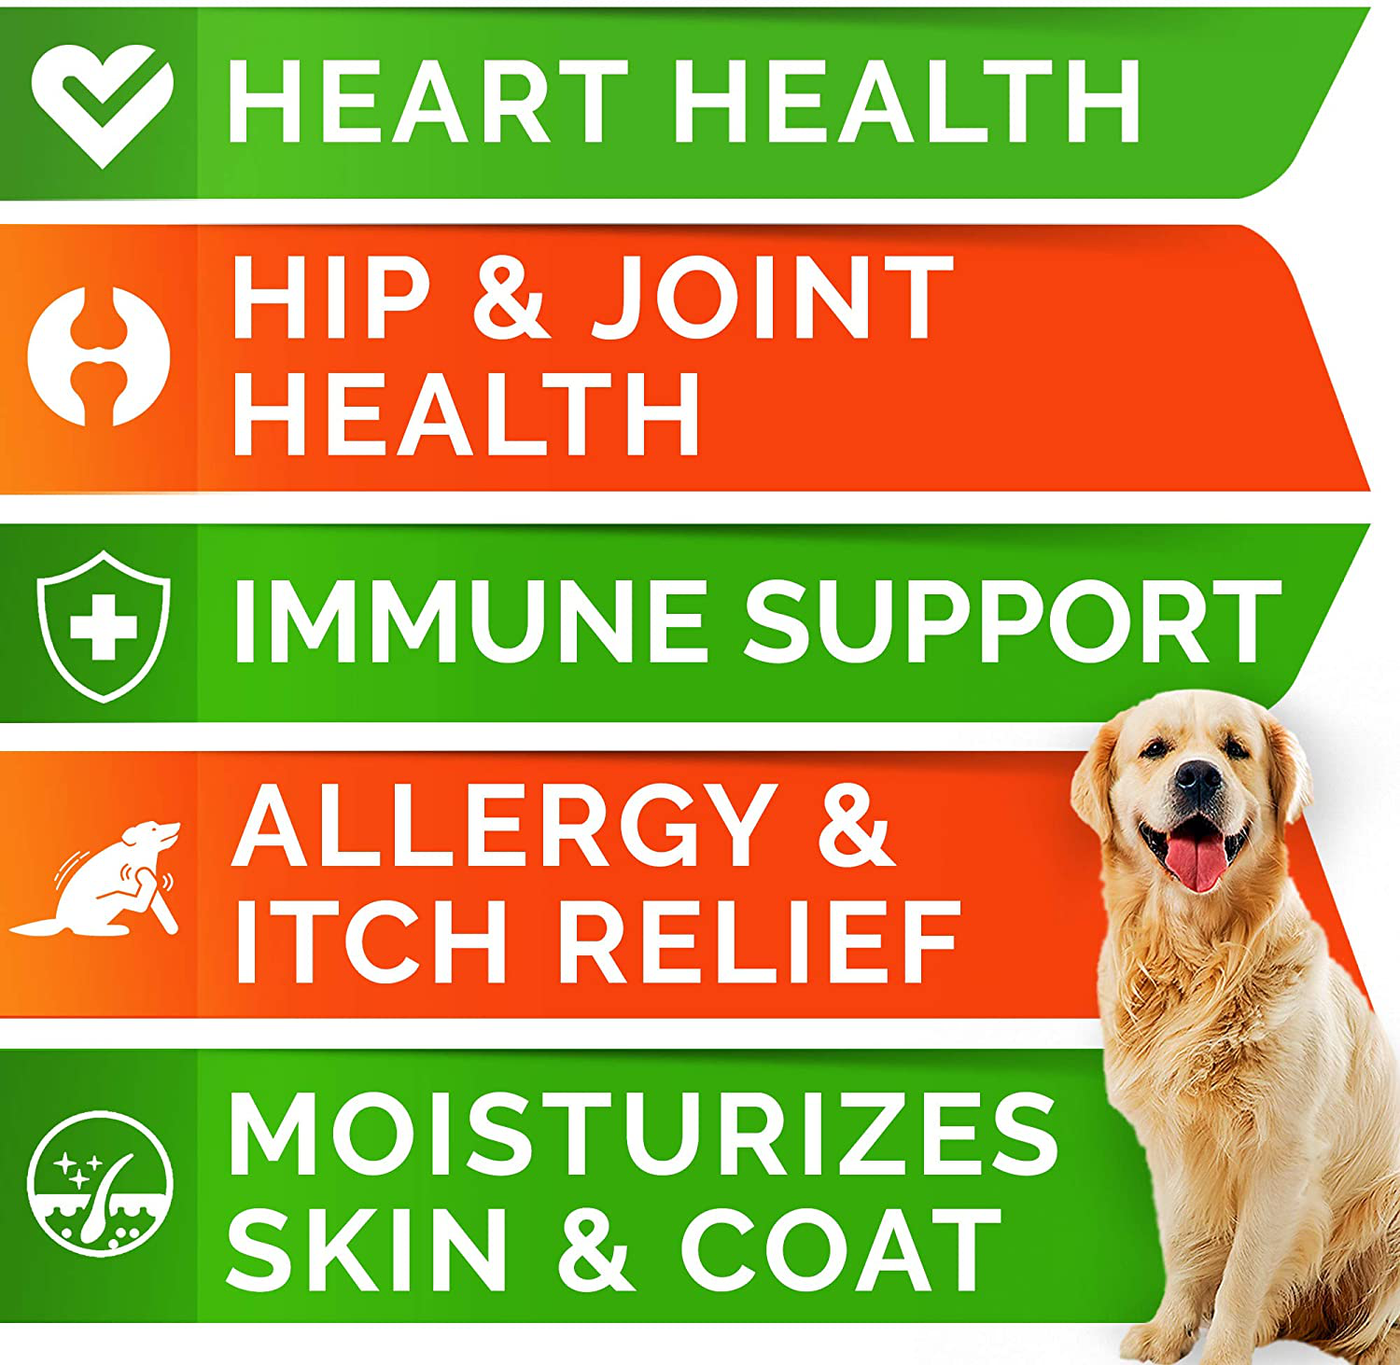 Fish Oil Omega 3 Treats for Dogs - Allergy Relief - Joint Health - Itch Relief, Shedding - Skin and Coat Supplement - Alaskan Salmon Oil Chews